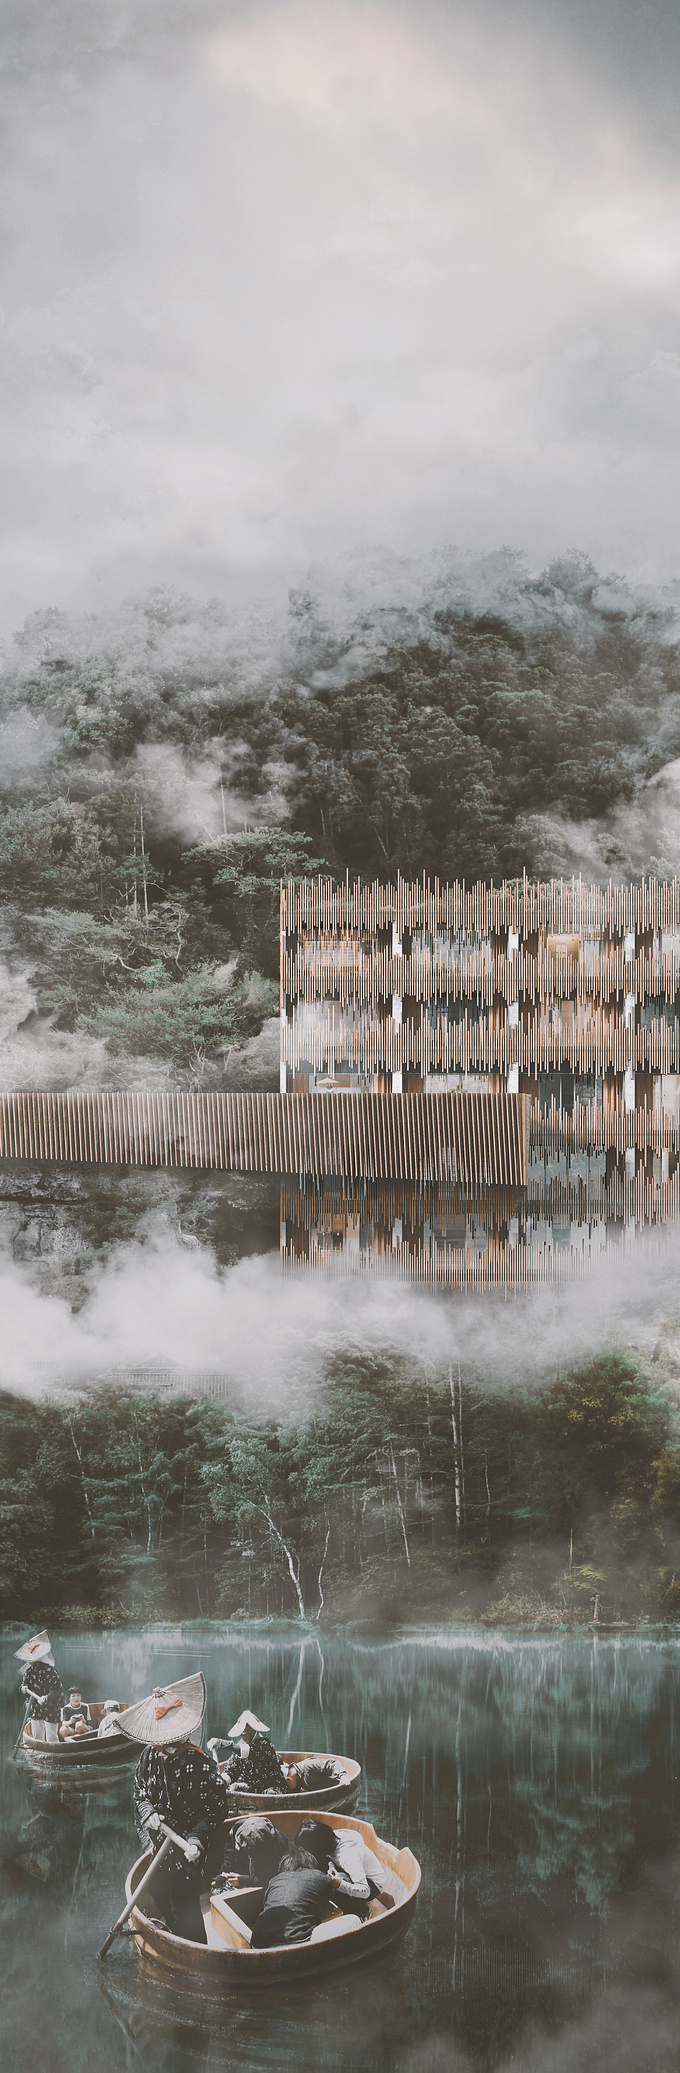 This is a personnal project about a ryokan in front of a japan lake.

This work was inspirated by Kengo Kuma's architecture.

Made with Lightwave and Photoshop...